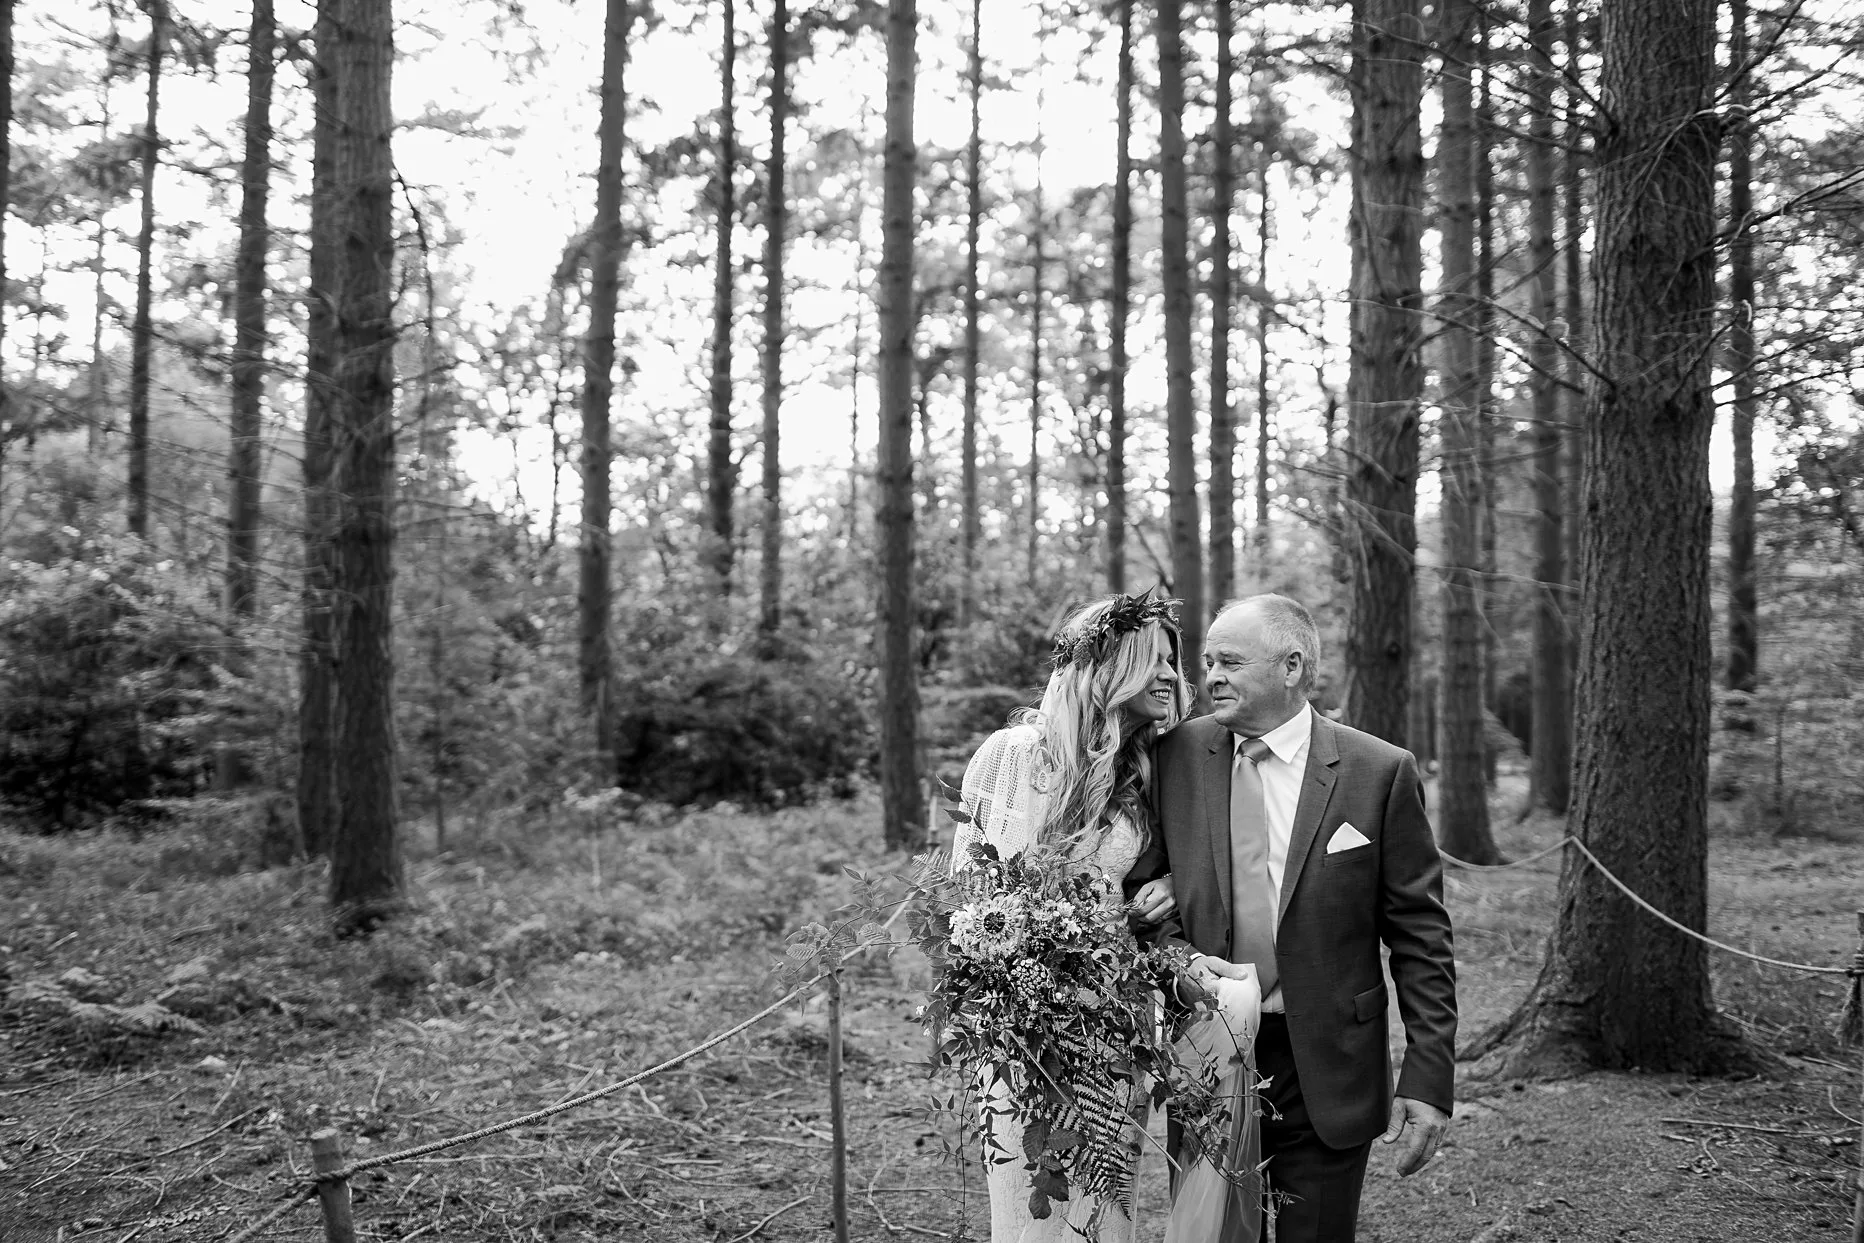 Emotional moment between the bride and her dad. They are walking through the woods to the outdoor ceremony. The brides dad looks emotional, they are looking at each other smiling.